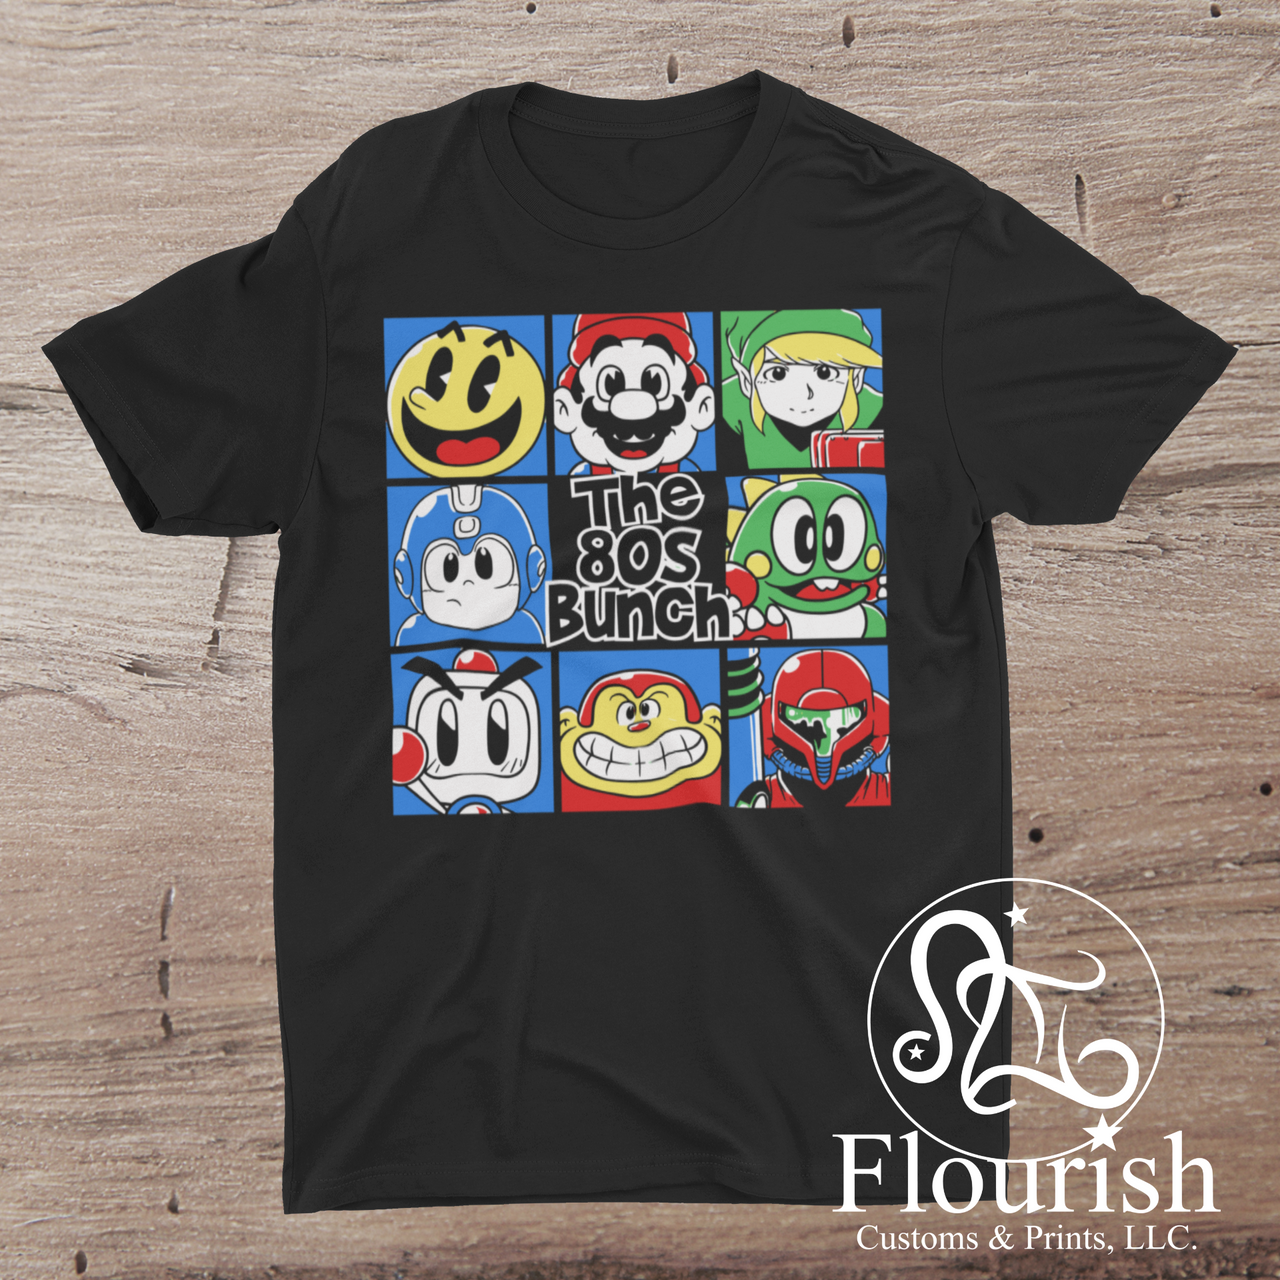 80's Bunch Gaming (Black Only) Tee